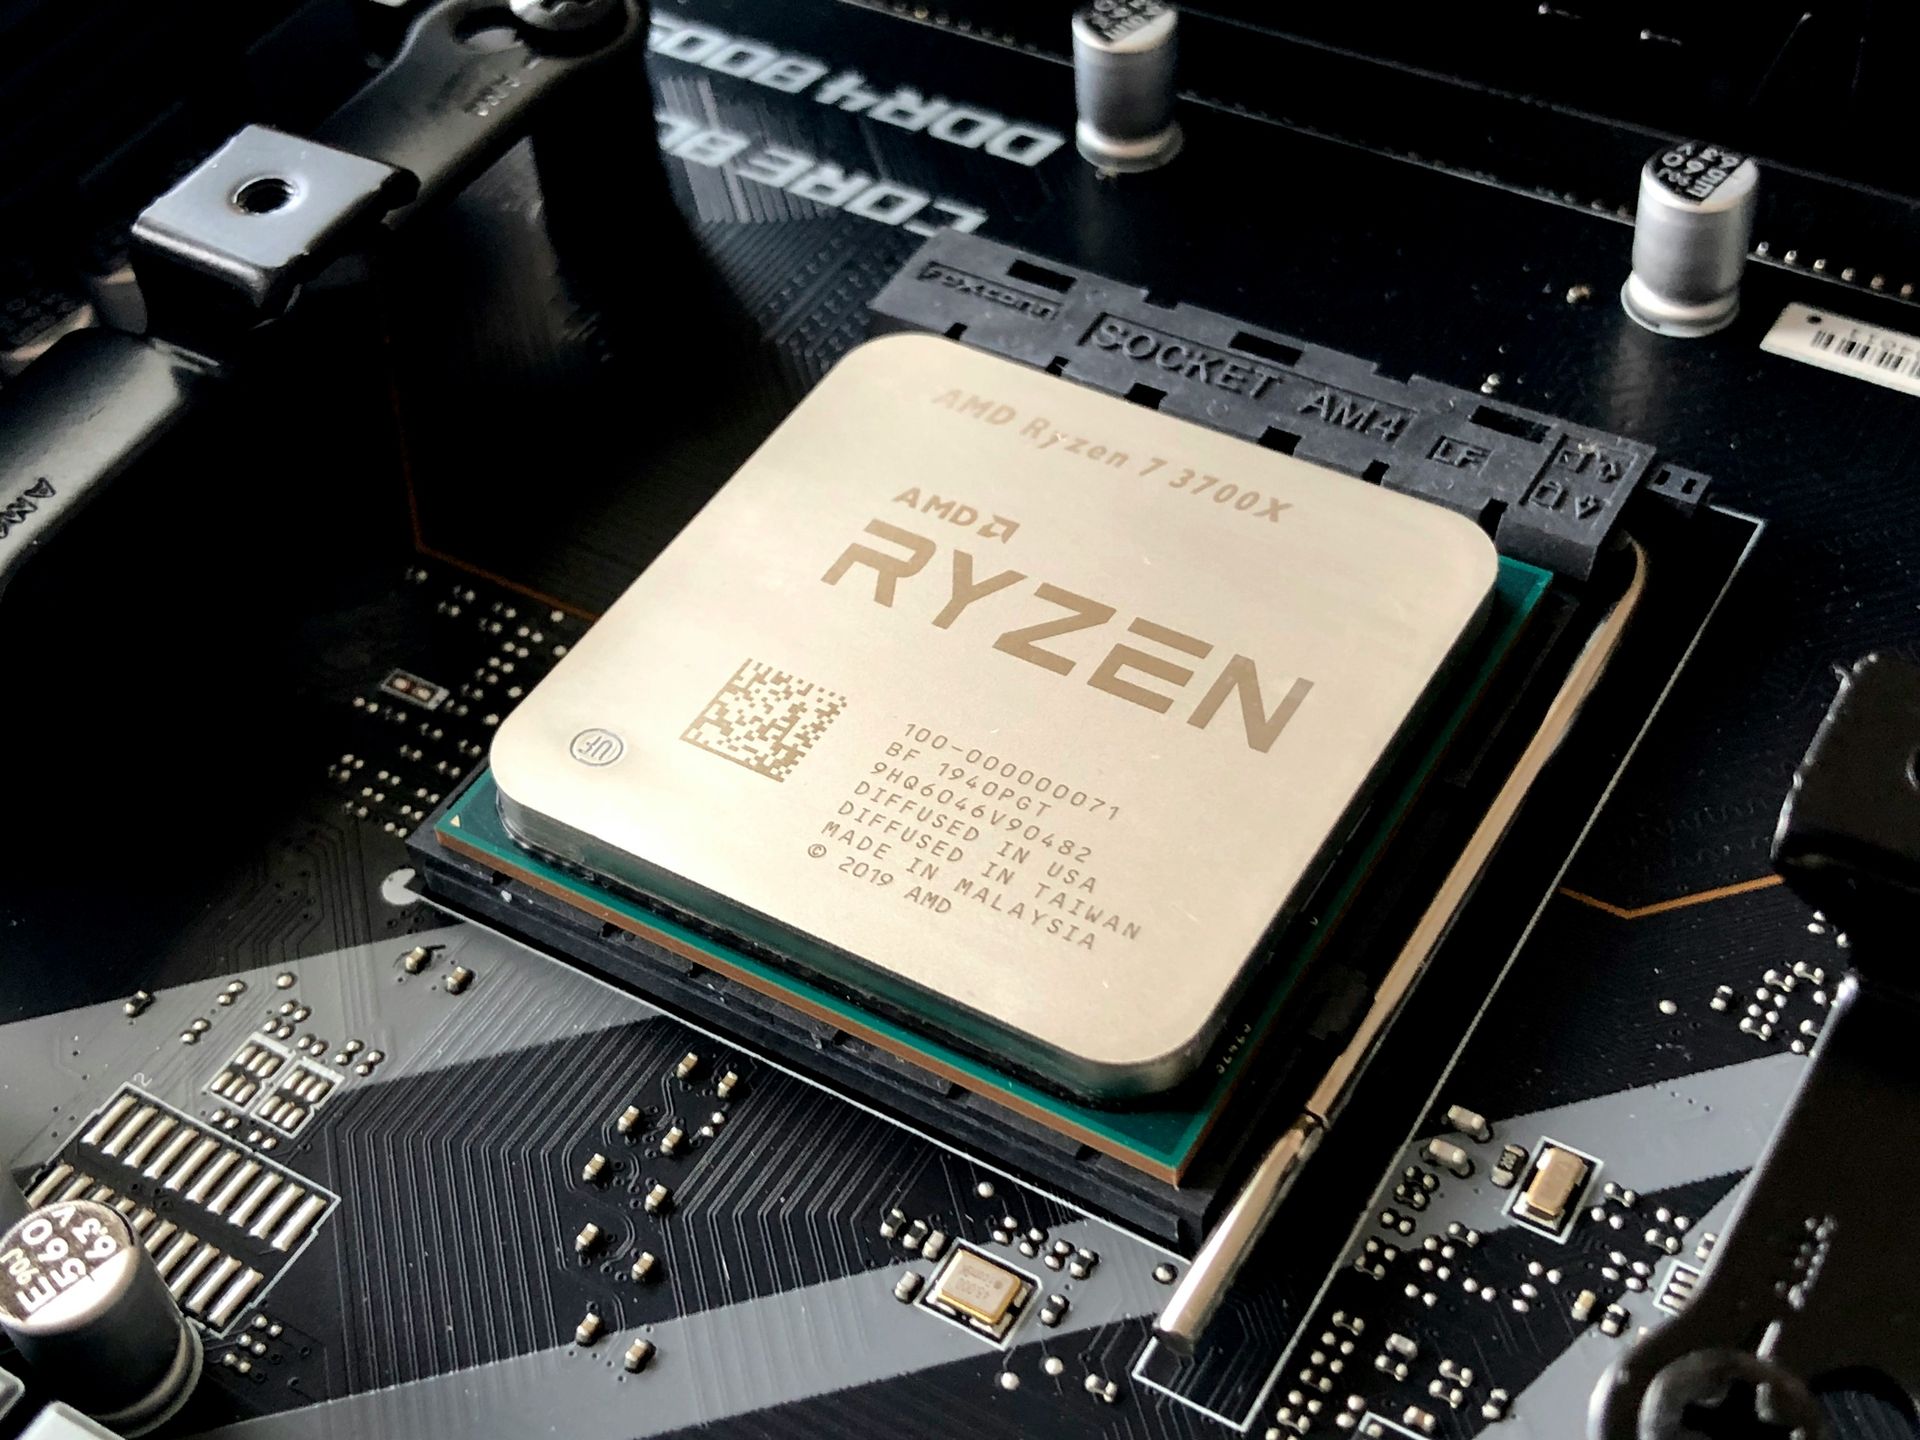 China bans Intel and AMD chips in government computers